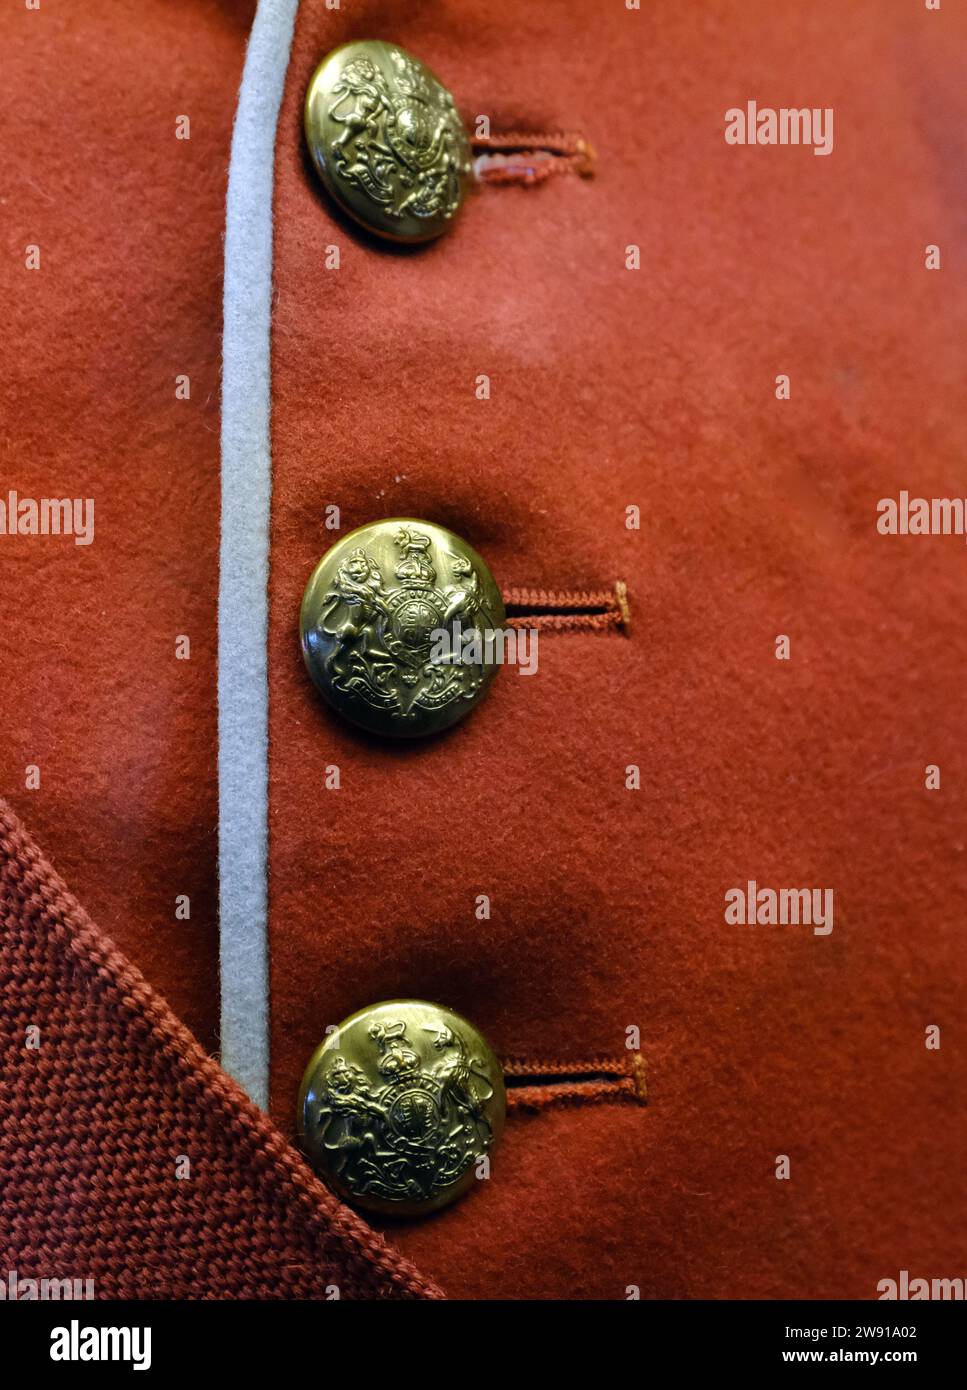 Military brass buttons on red uniform jacket. Stock Photo